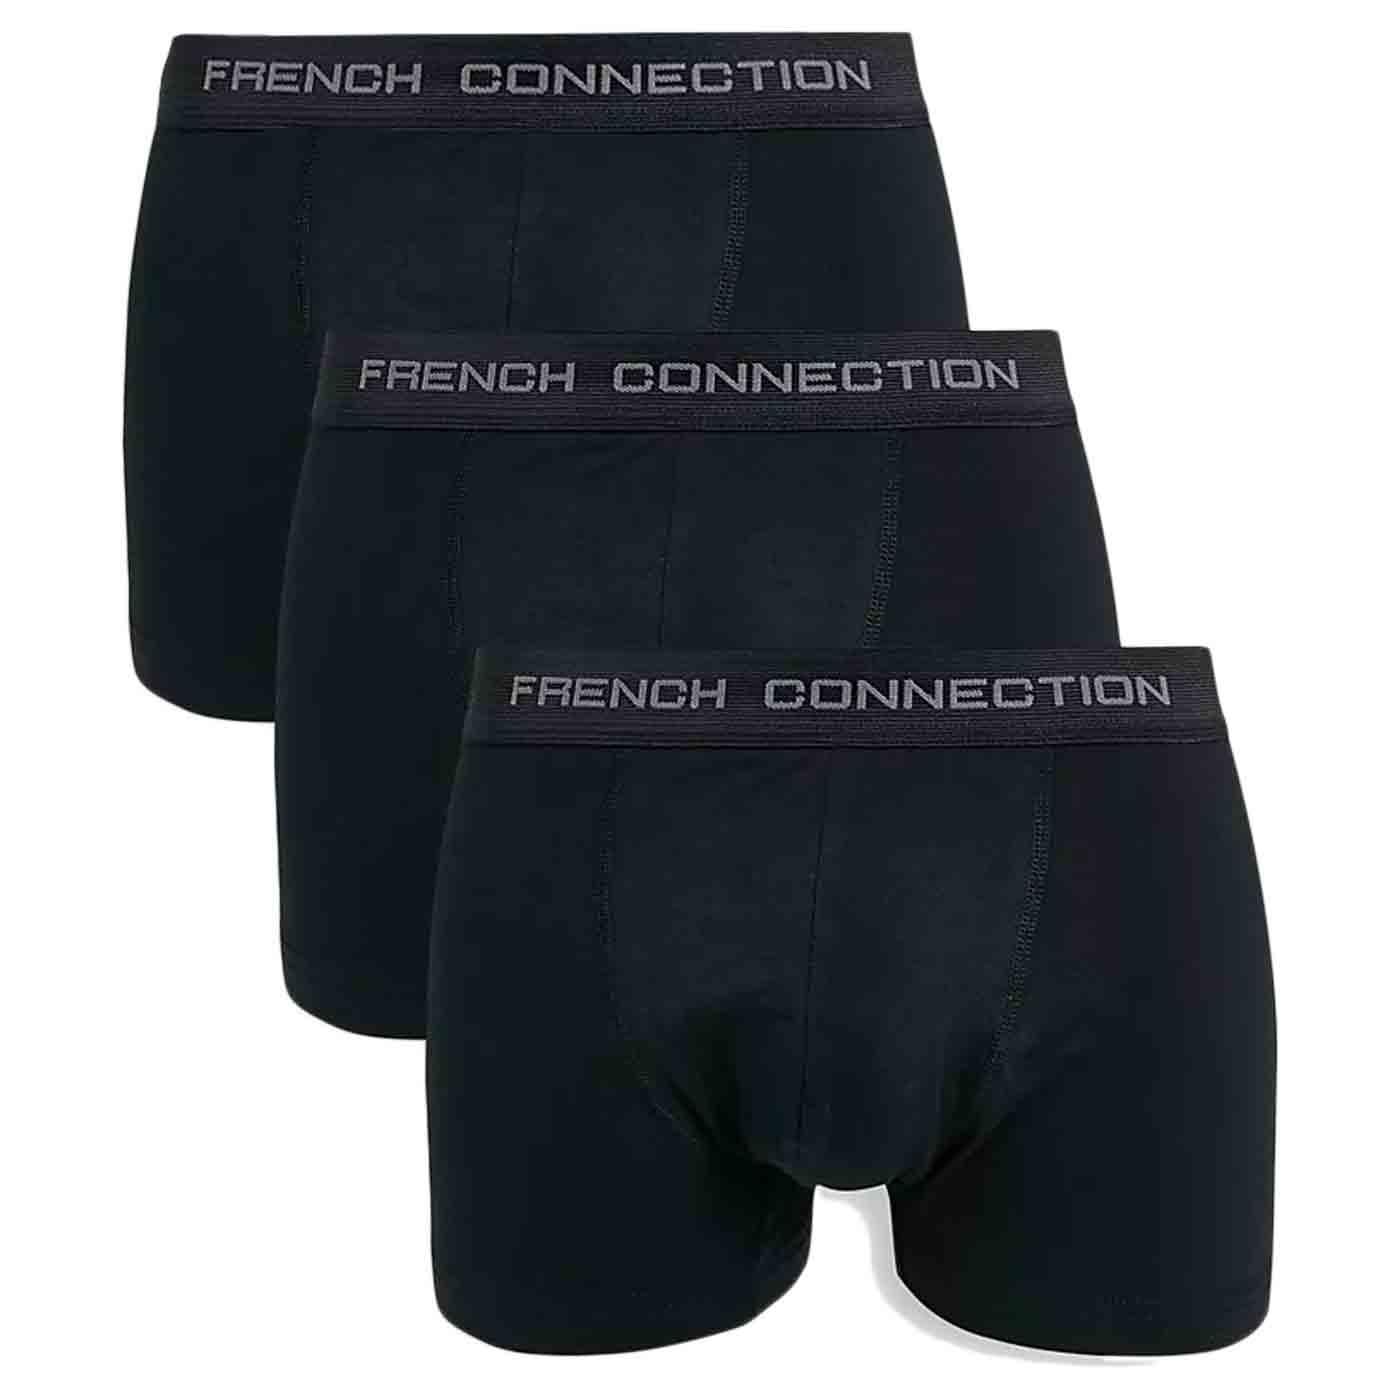 + FRENCH CONNECTION 3 Pack Boxer Shorts in Black